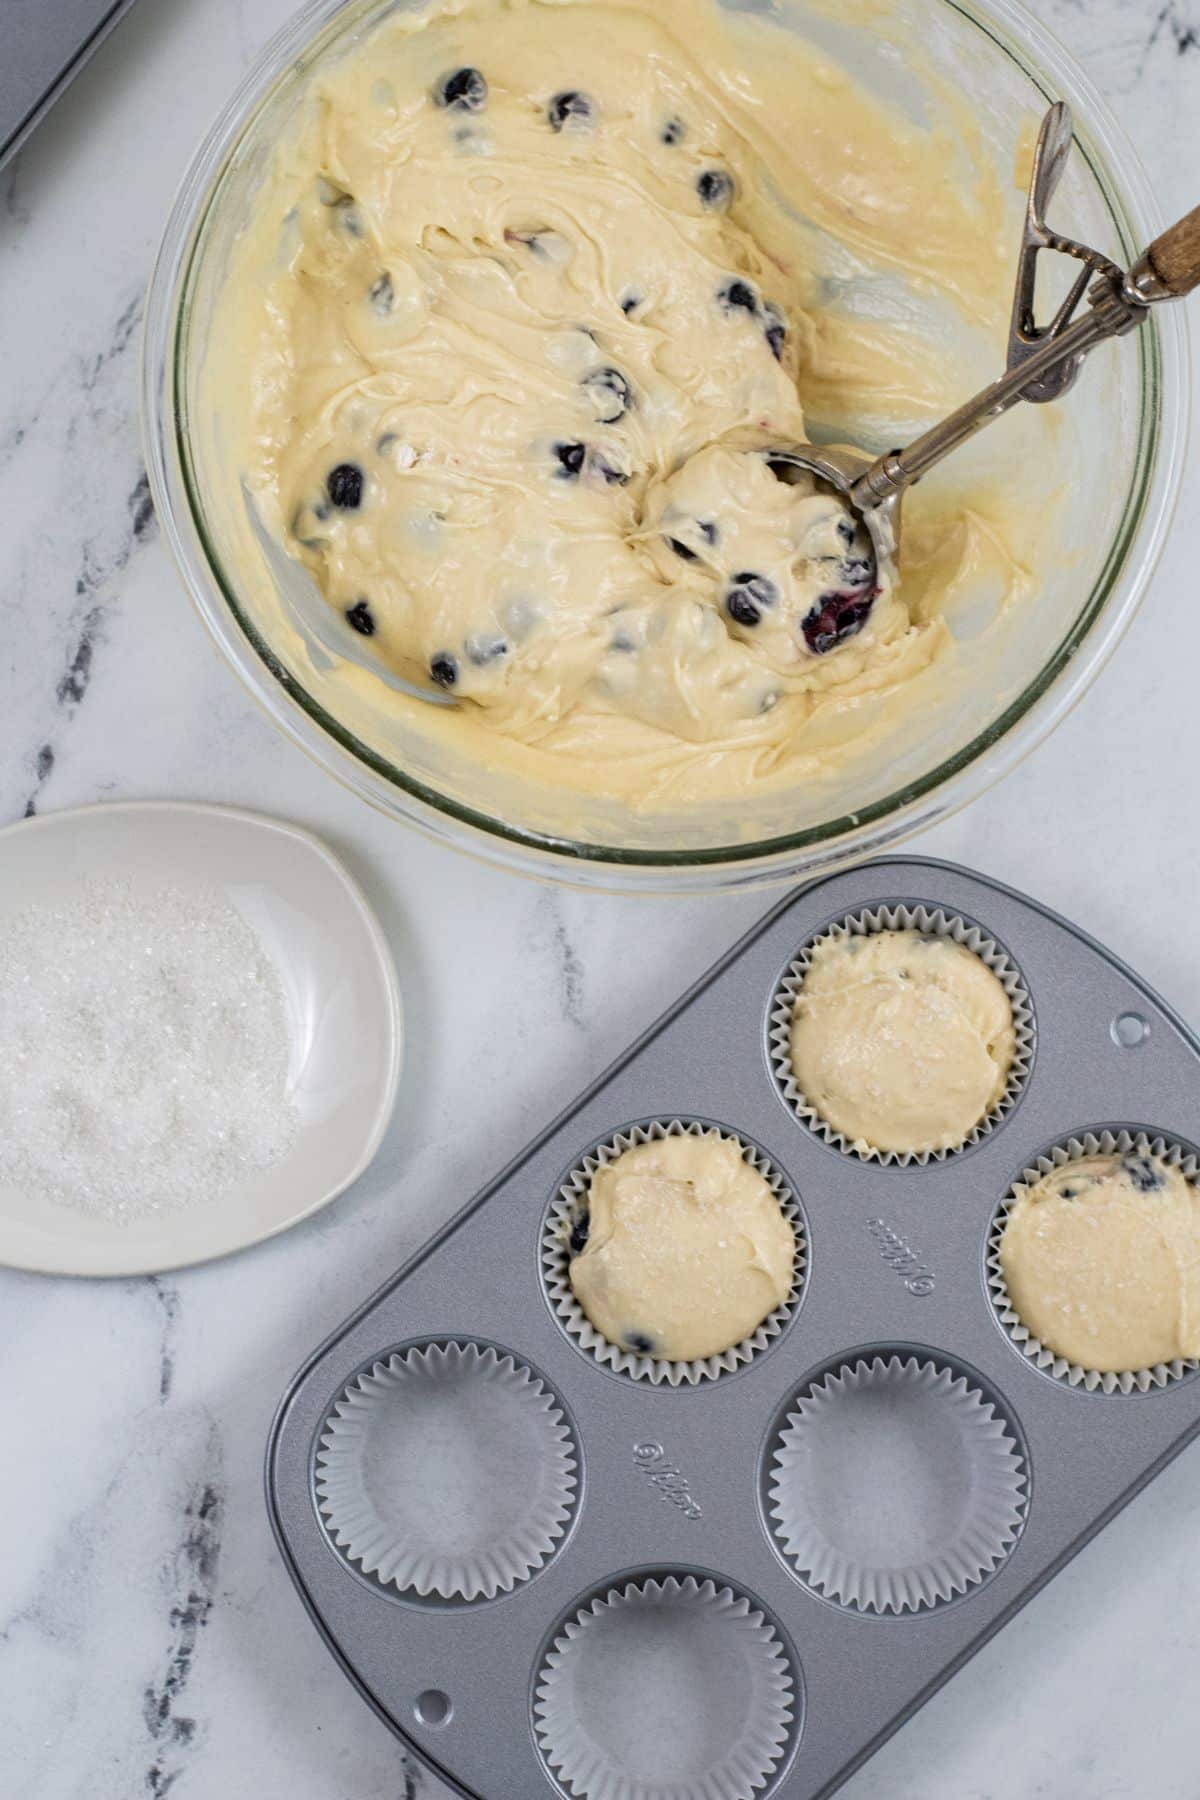 Muffin tin and muffin wrappers full with batter next to a bowl of muffin batter with a scoop in it